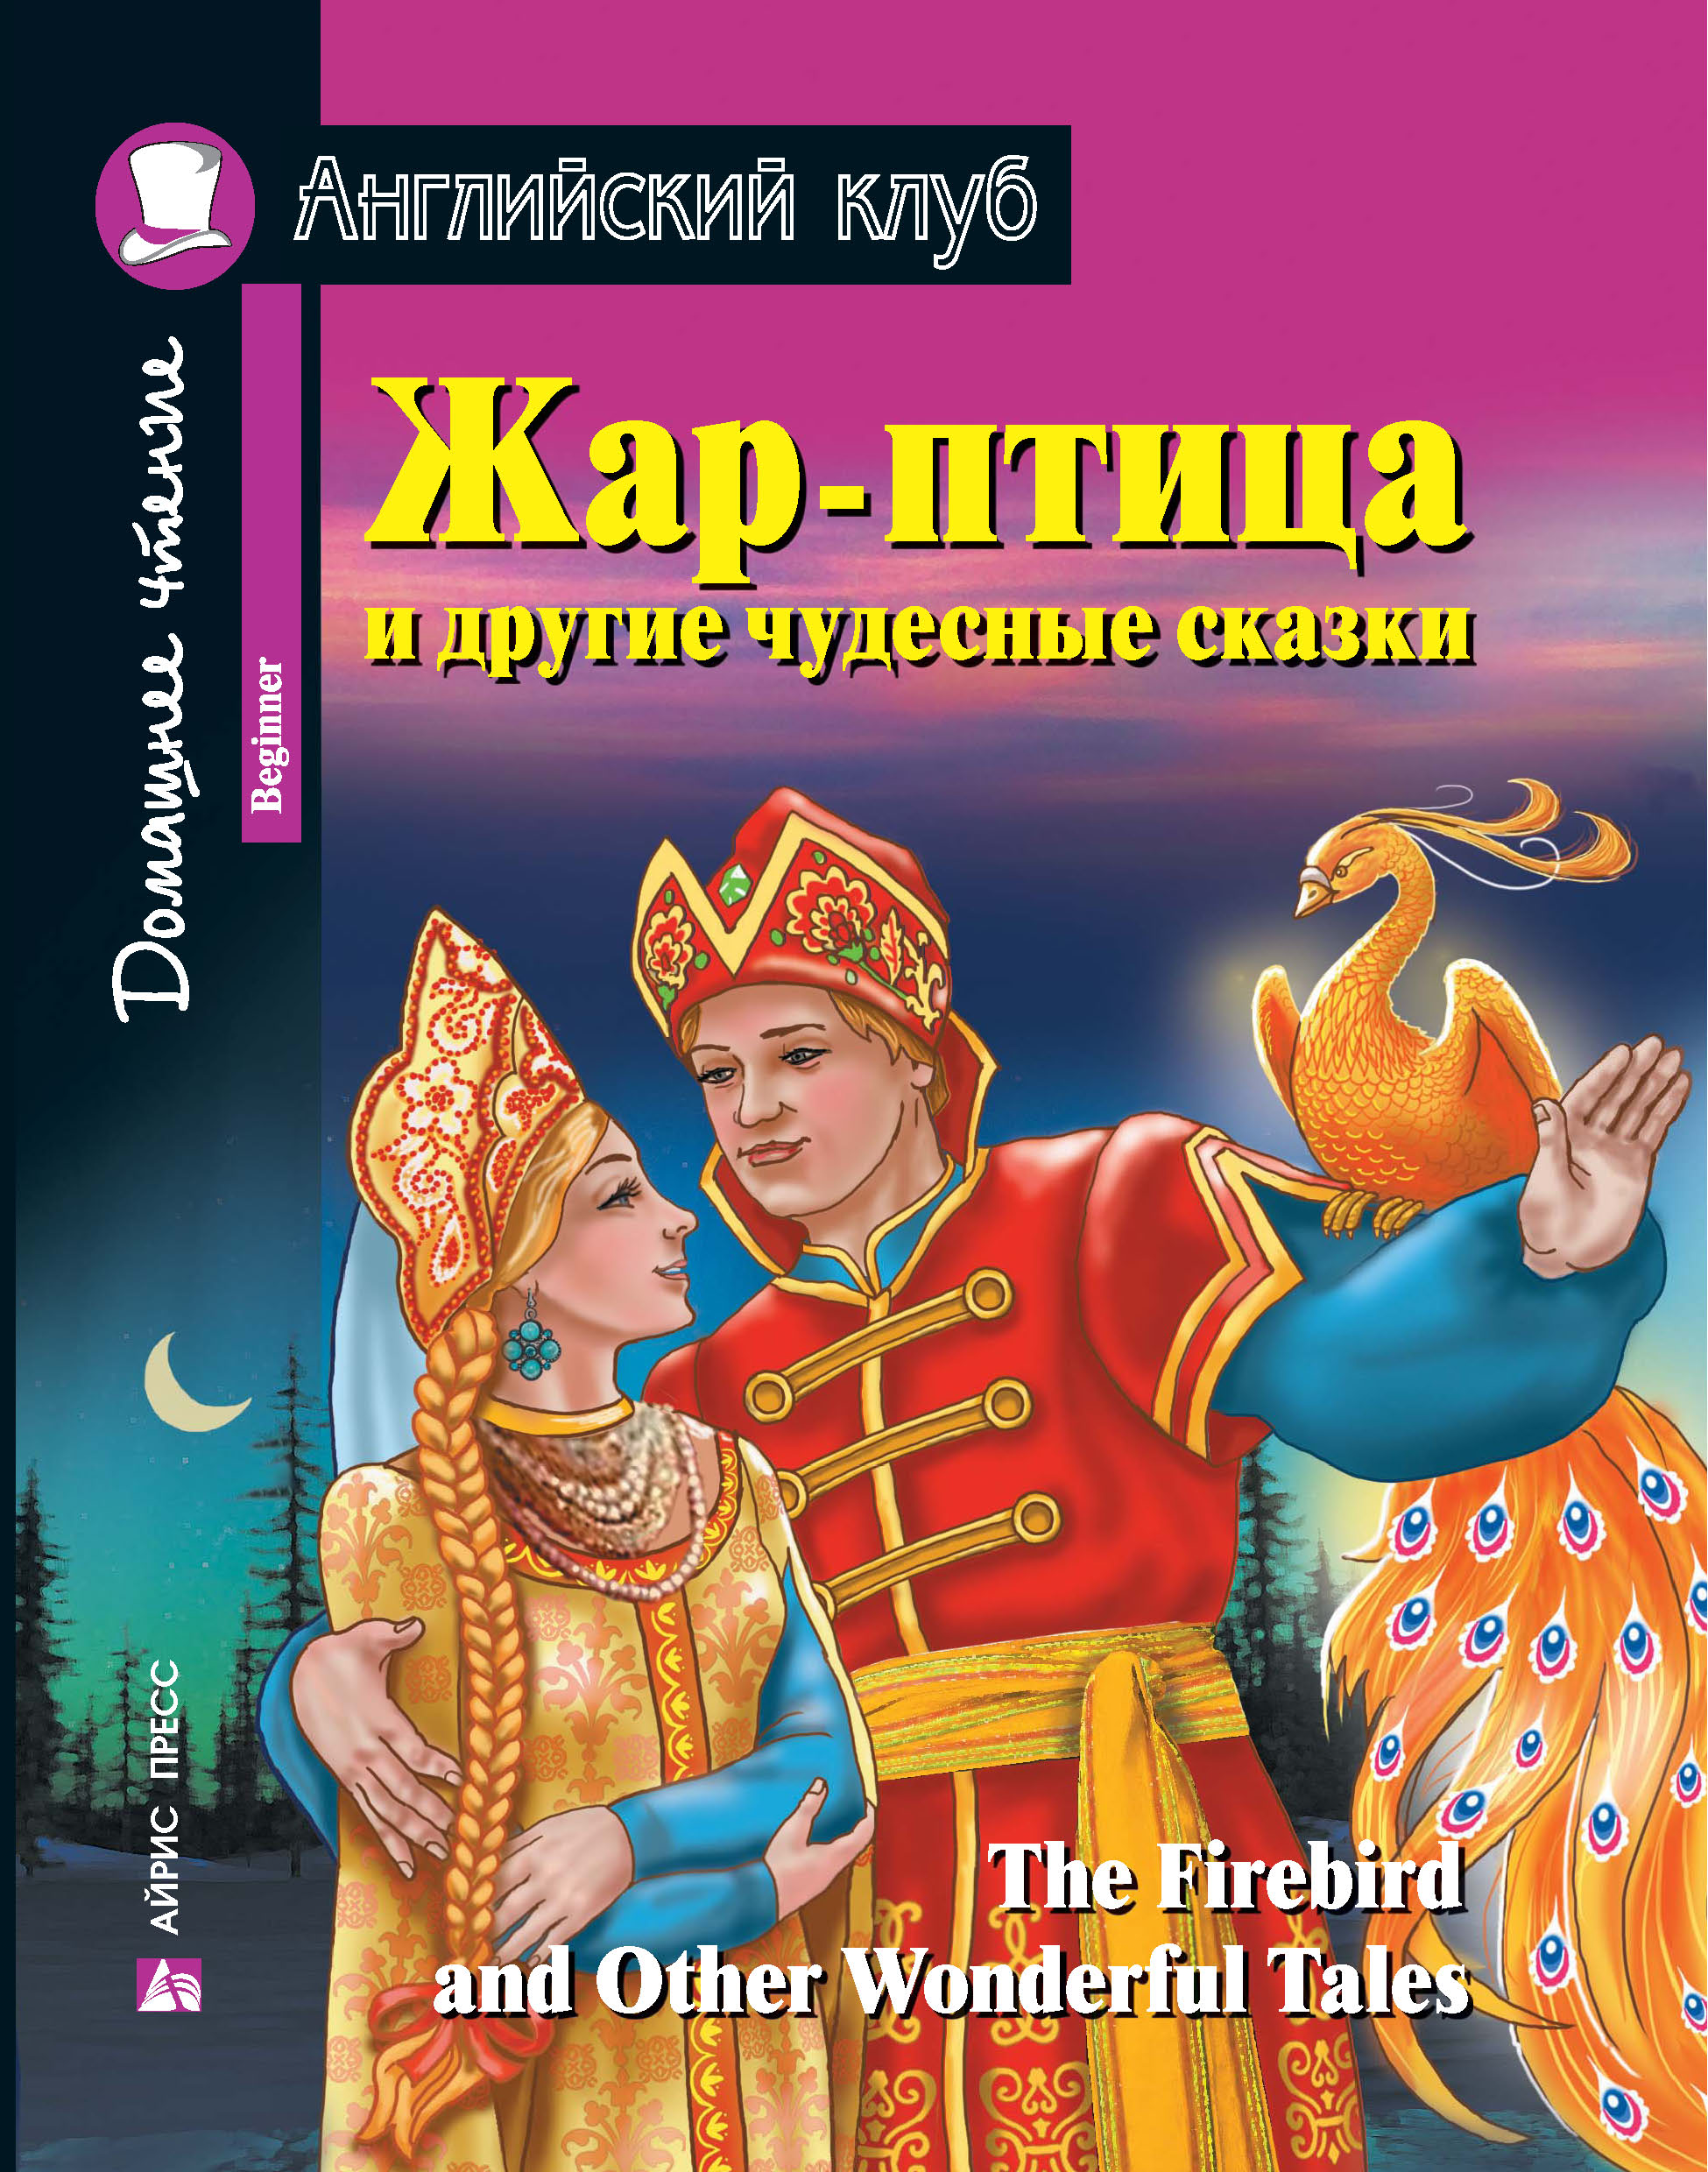 Жар-птица и другие чудесные сказки / The Firebird and Other Wonderful Tales